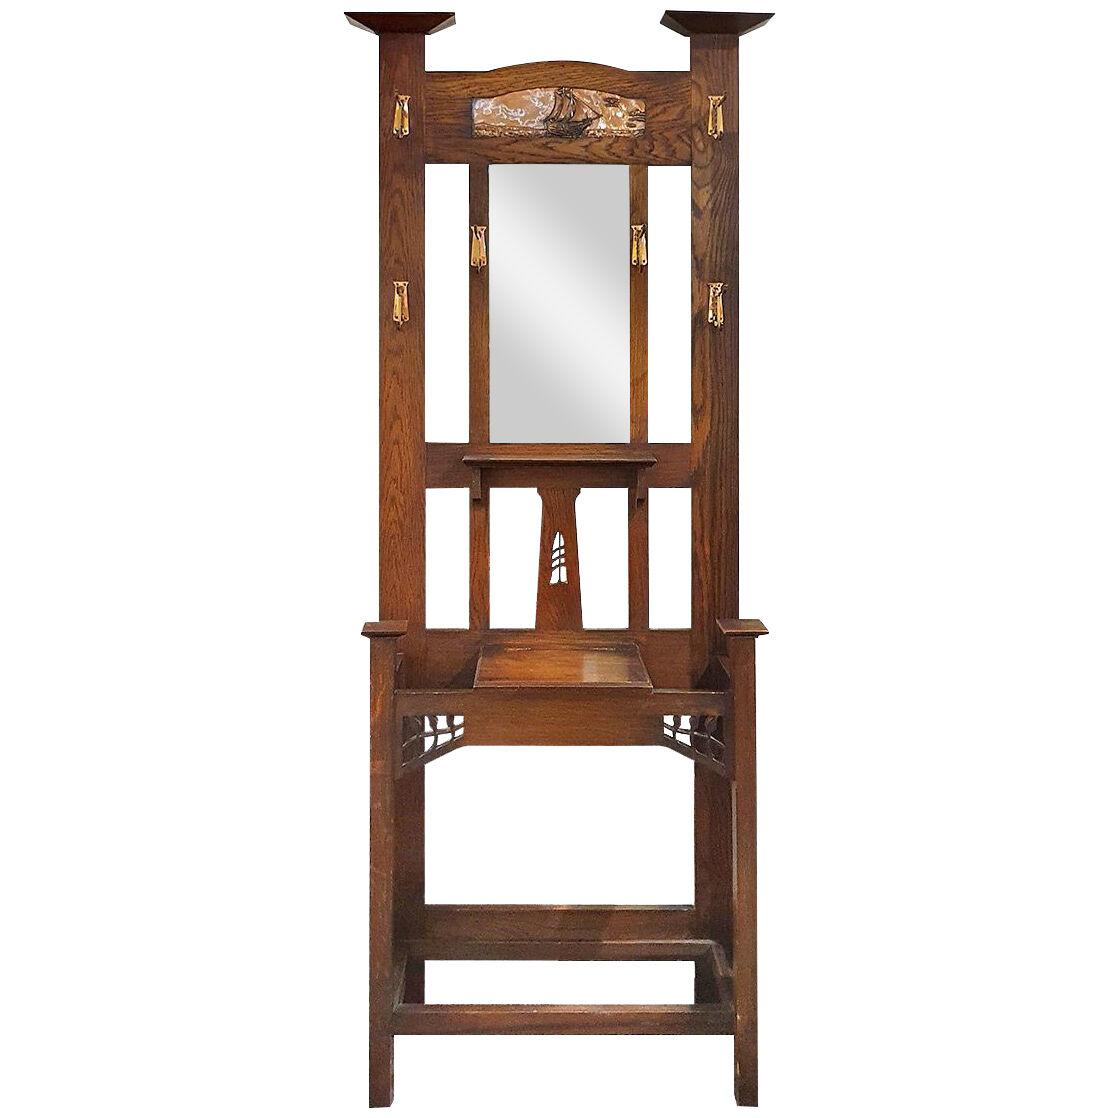 Arts and Crafts Movement Hallstand by Harris Lebus